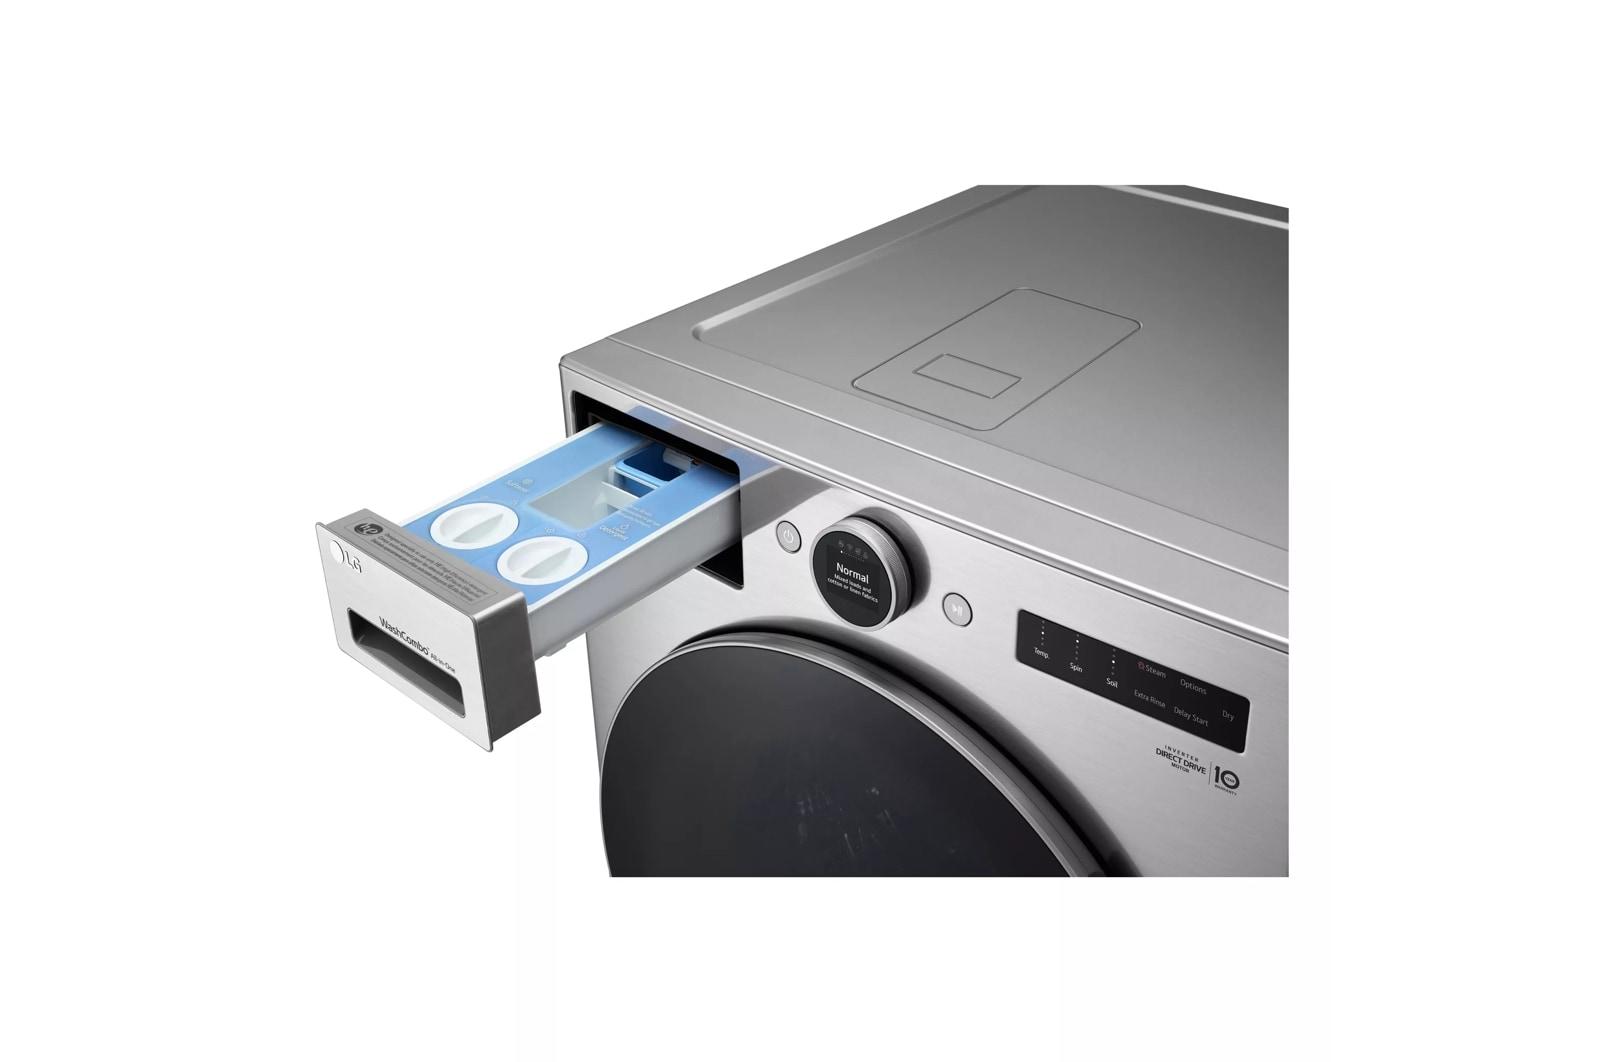 Lg Ventless Washer/Dryer Combo LG WashCombo? All-in-One 5.0 cu. ft. Mega Capacity with Inverter HeatPump? Technology and Direct Drive Motor